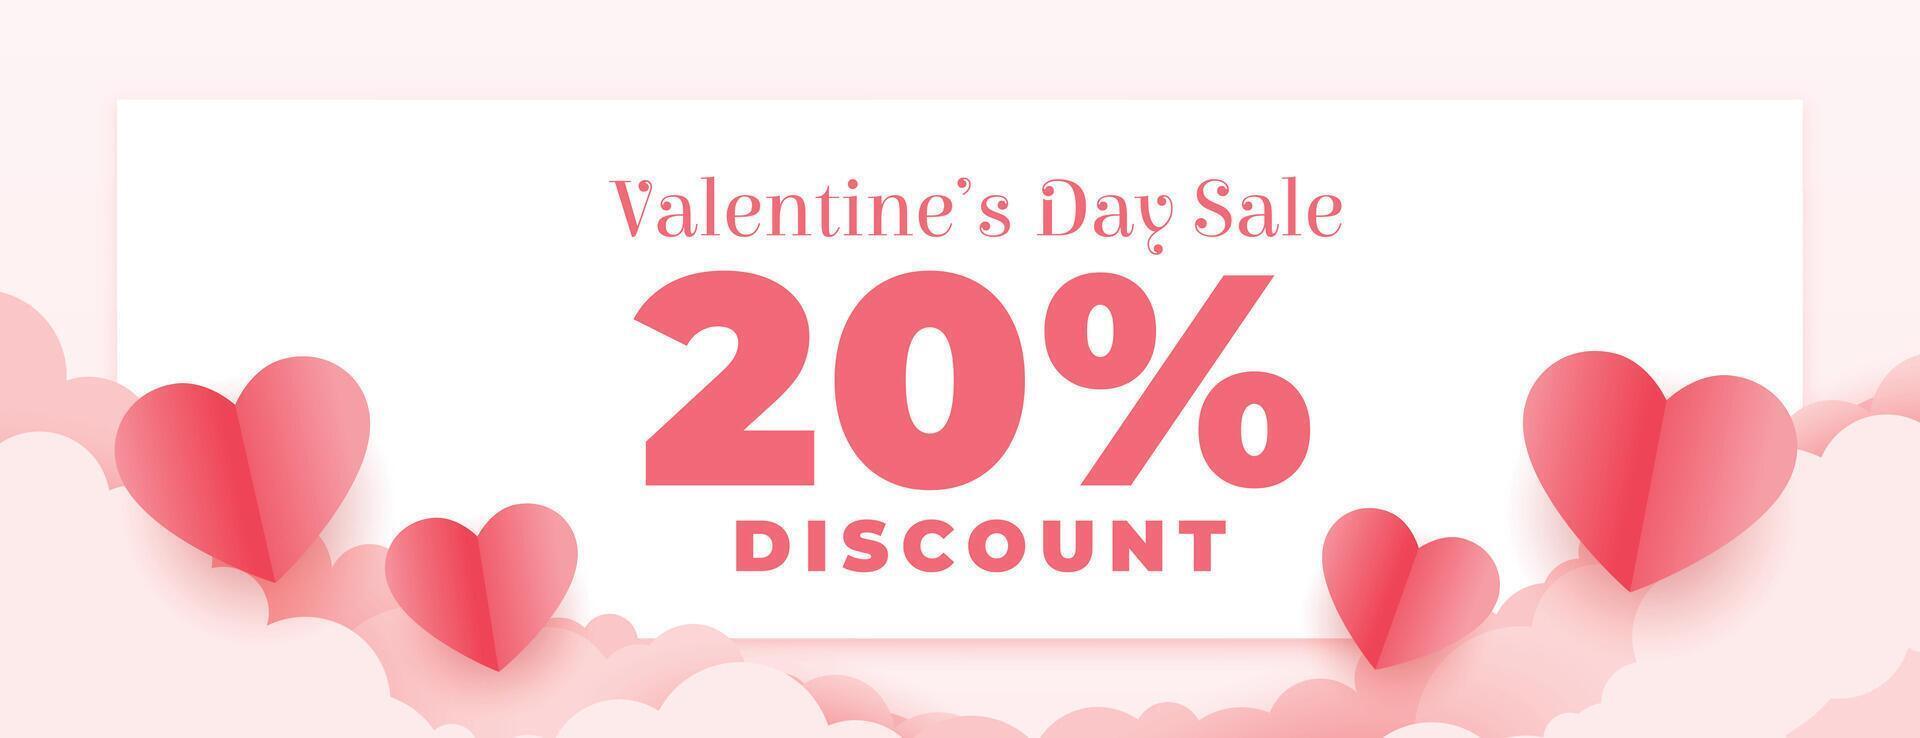 valentines day sale and discount banner in paper style vector